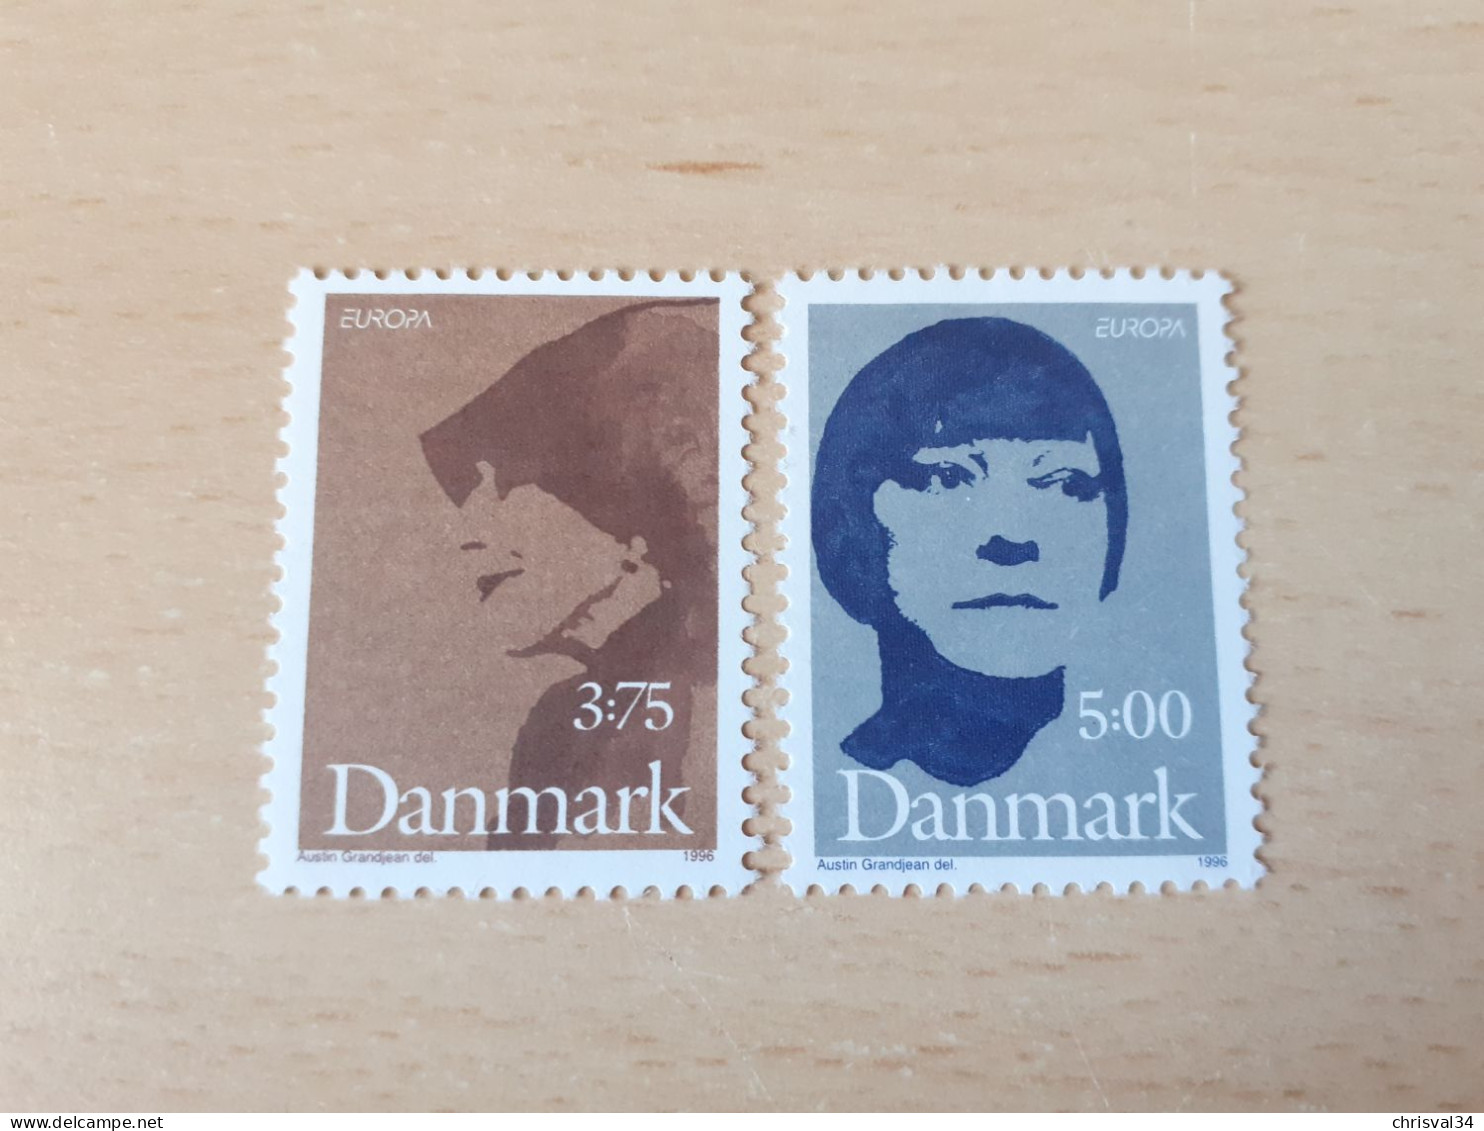 TIMBRES   DANEMARK    ANNEE  1996     N  1128  /  1129    COTE  4,00  EUROS   NEUFS  LUXE** - Nuovi